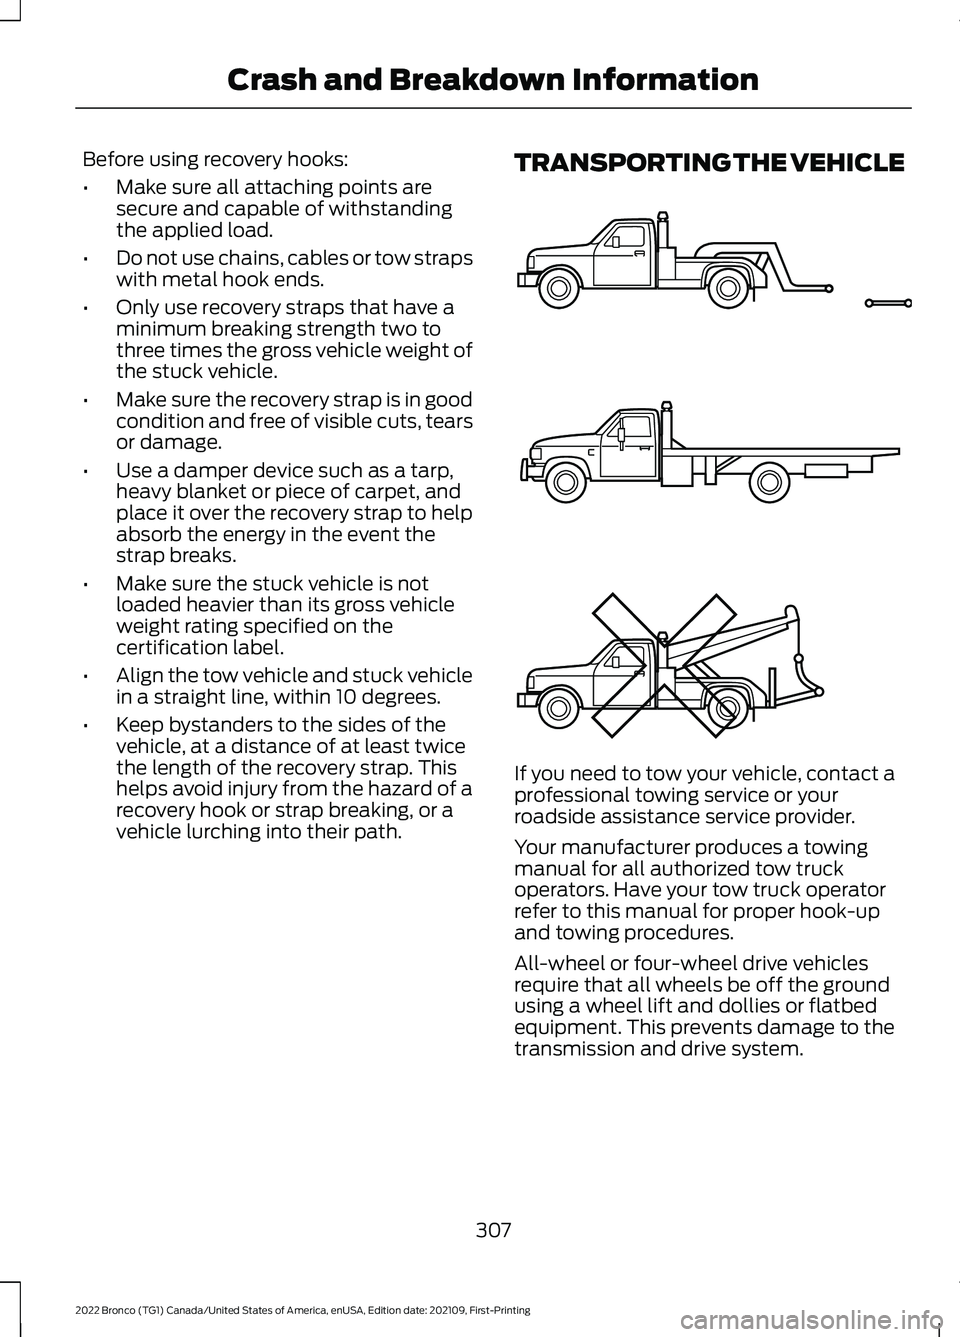 FORD BRONCO 2022  Owners Manual Before using recovery hooks:
•Make sure all attaching points aresecure and capable of withstandingthe applied load.
•Do not use chains, cables or tow strapswith metal hook ends.
•Only use recove